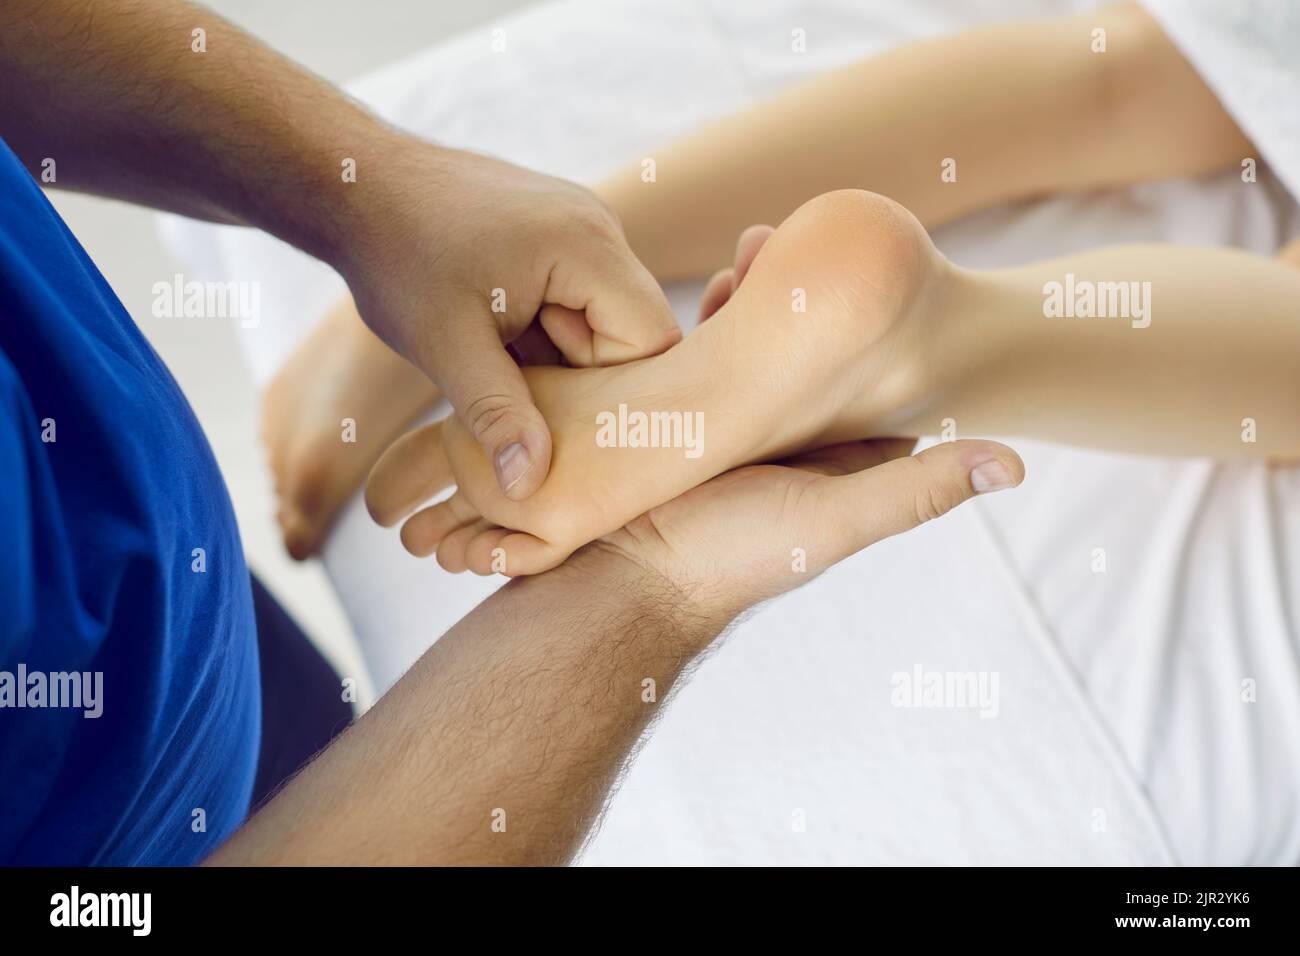 Reflexologist and acupressure therapy professional doing foot massage to young woman Stock Photo